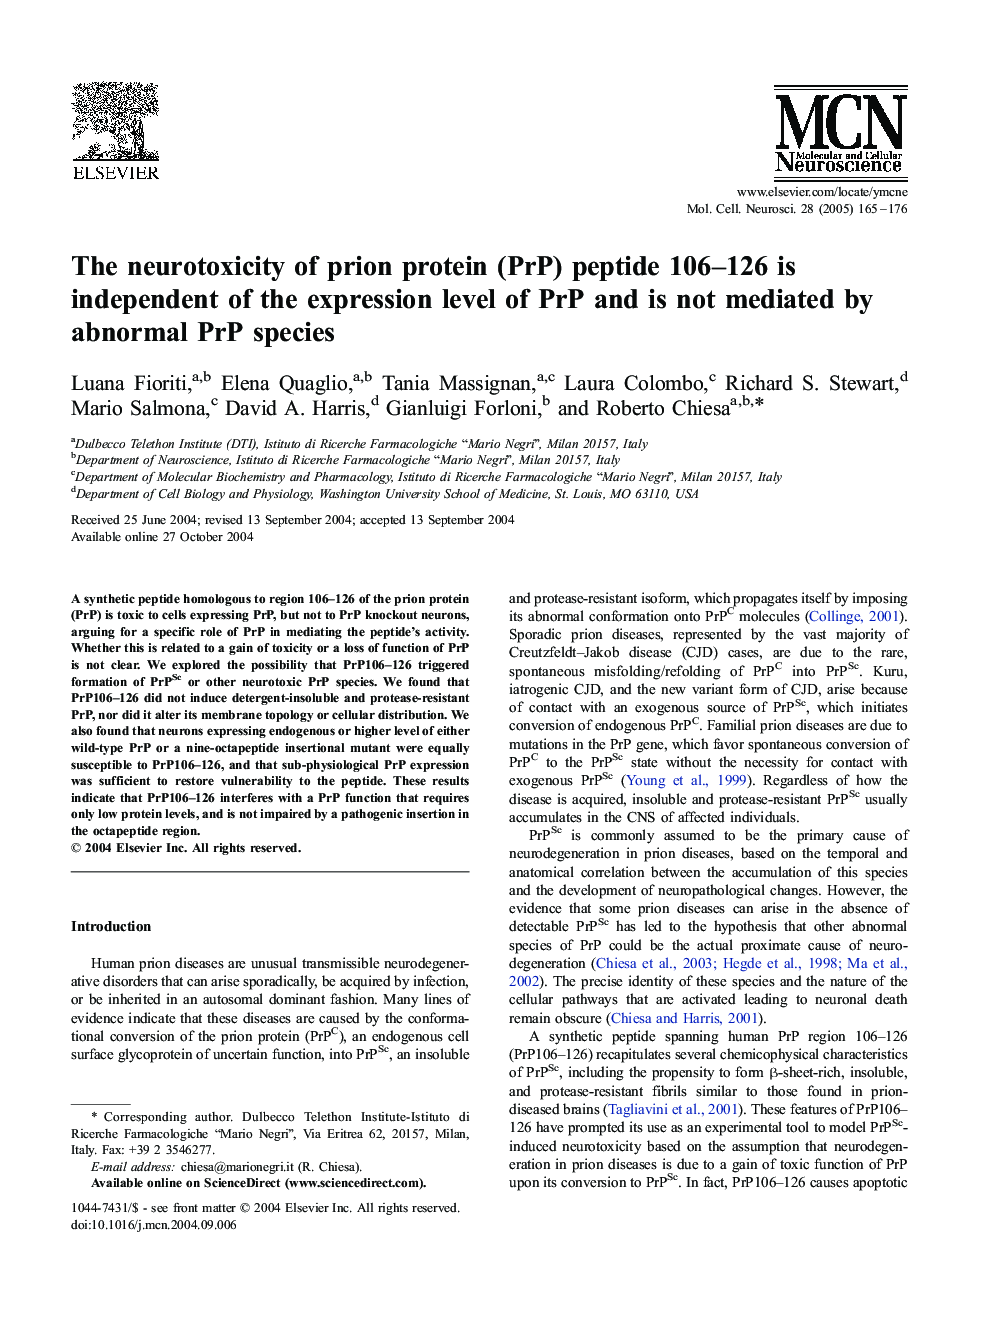 The neurotoxicity of prion protein (PrP) peptide 106-126 is independent of the expression level of PrP and is not mediated by abnormal PrP species